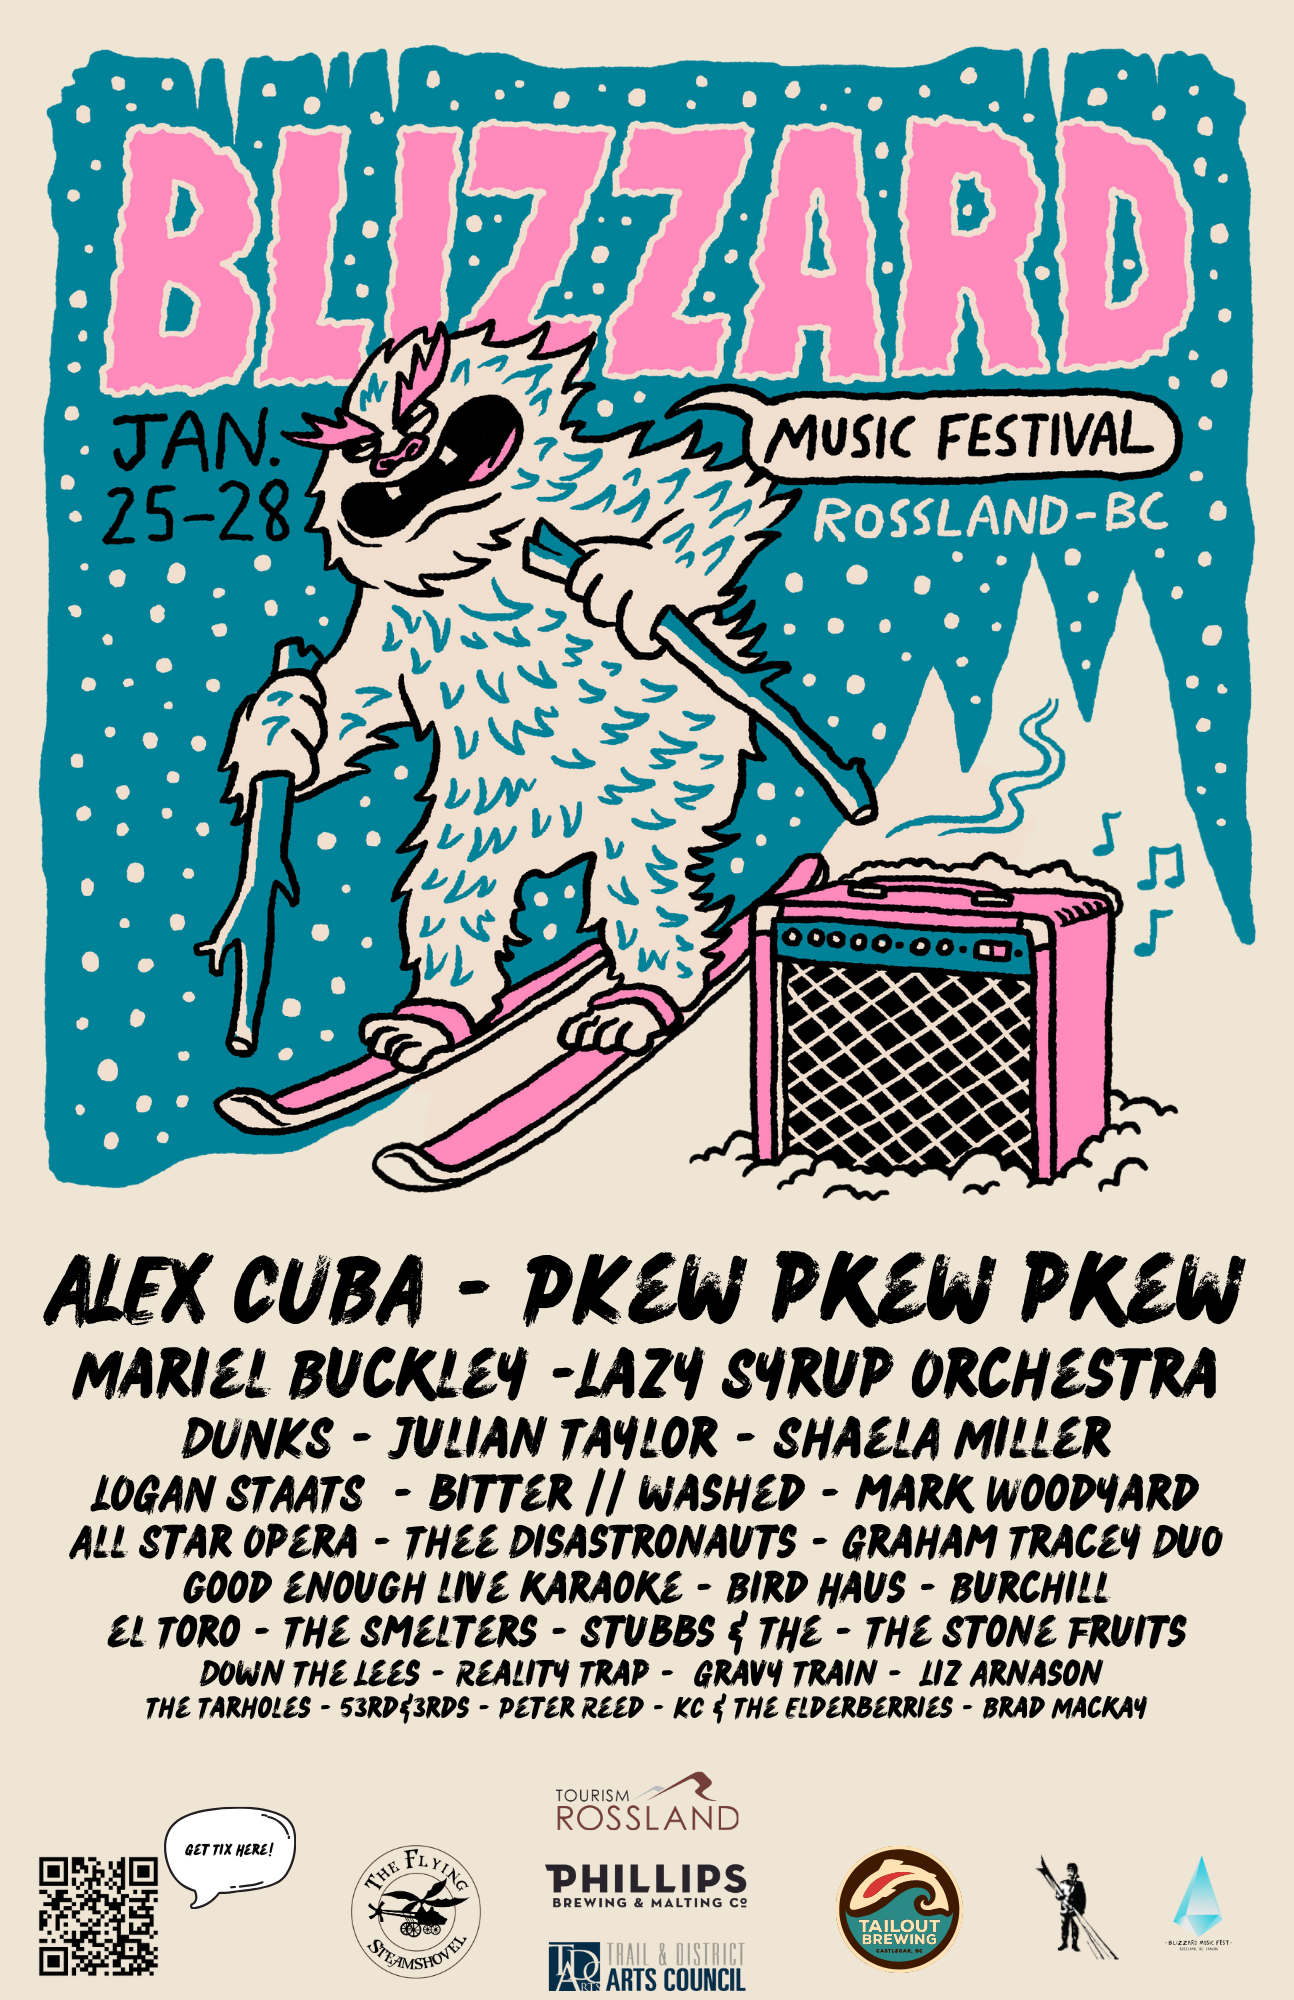 Epic Canadian Winter Music Festival Forcasted for Rossland